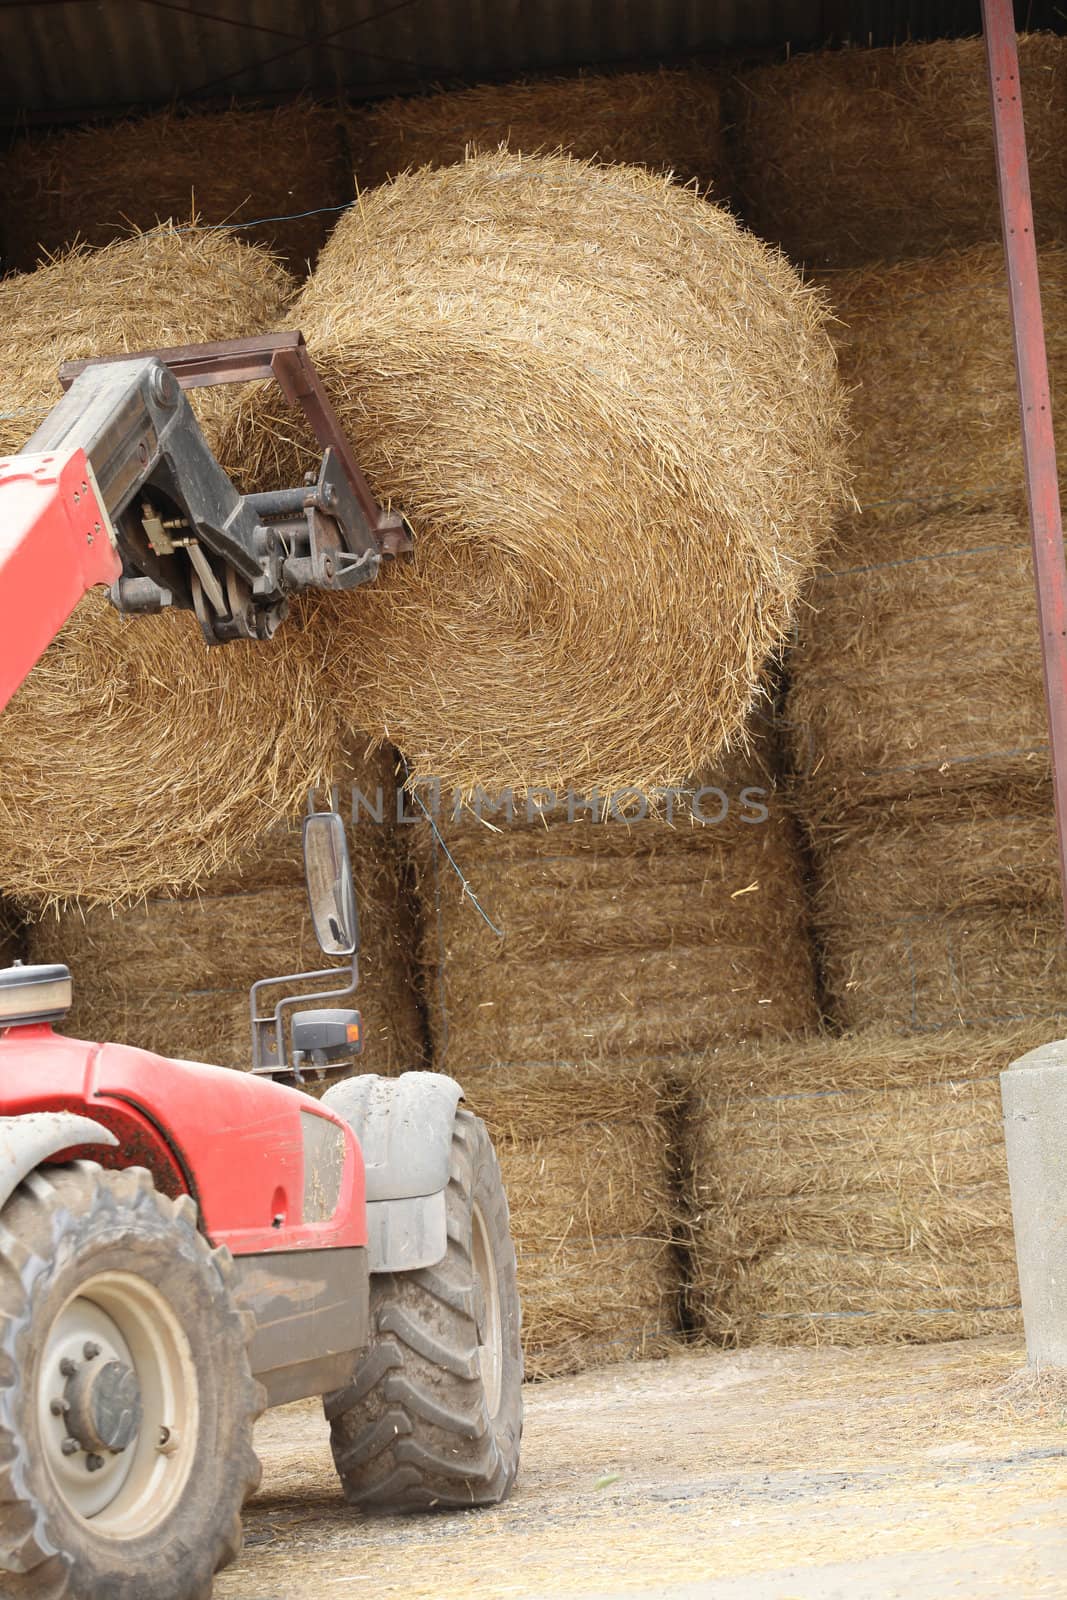 Tractor lifting bail of hay by phovoir